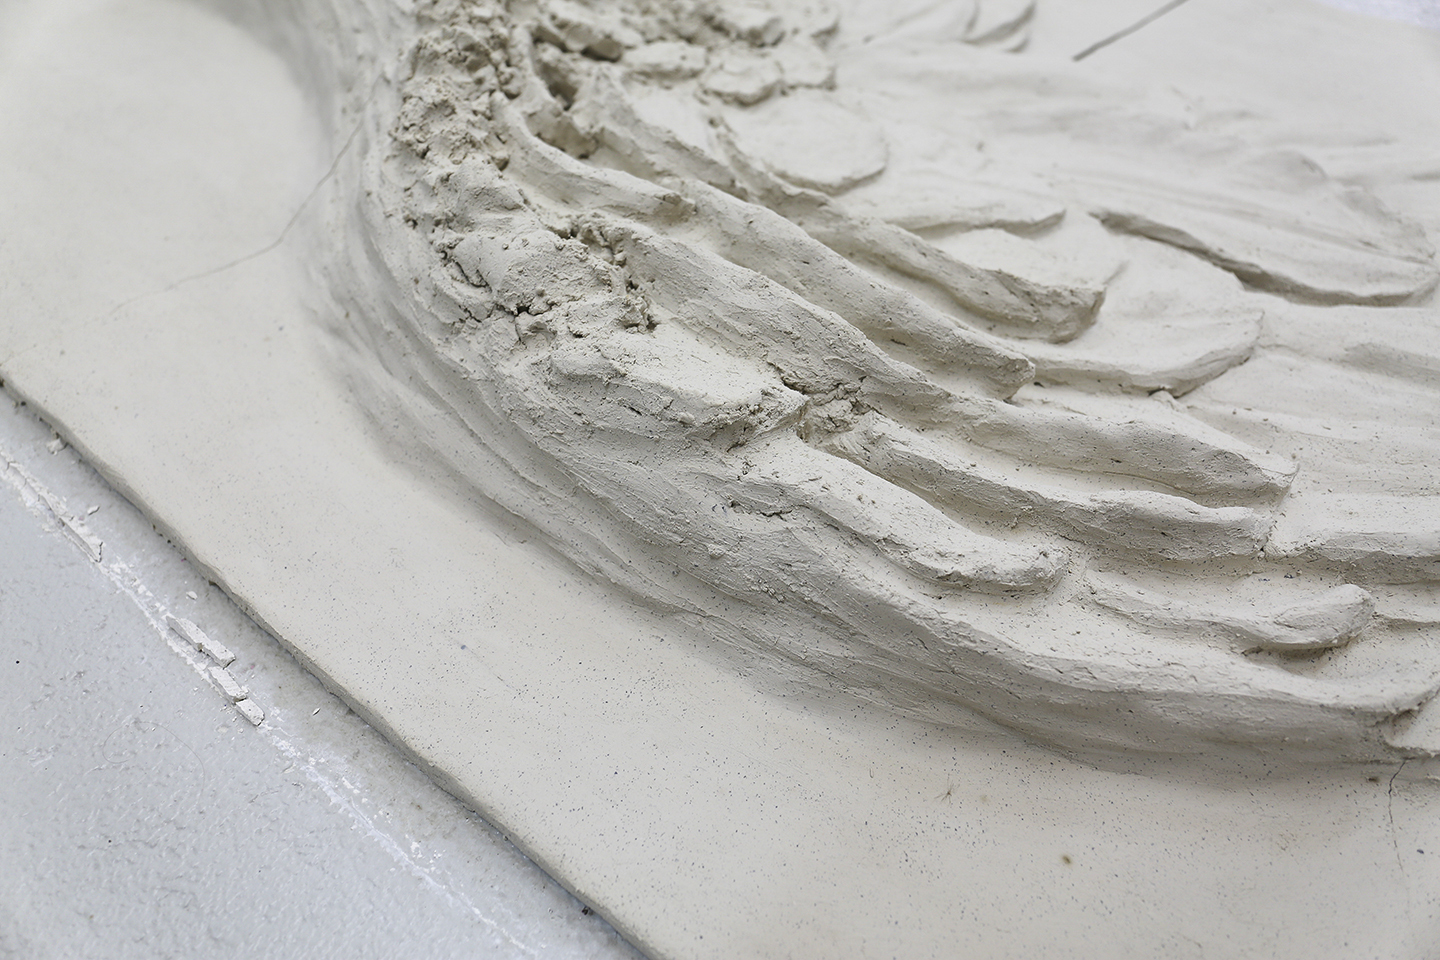 Gaëlle Leenhardt, Niki's Wing, 2020, white clay from Grimma, work in situ, 154 x 99 cm